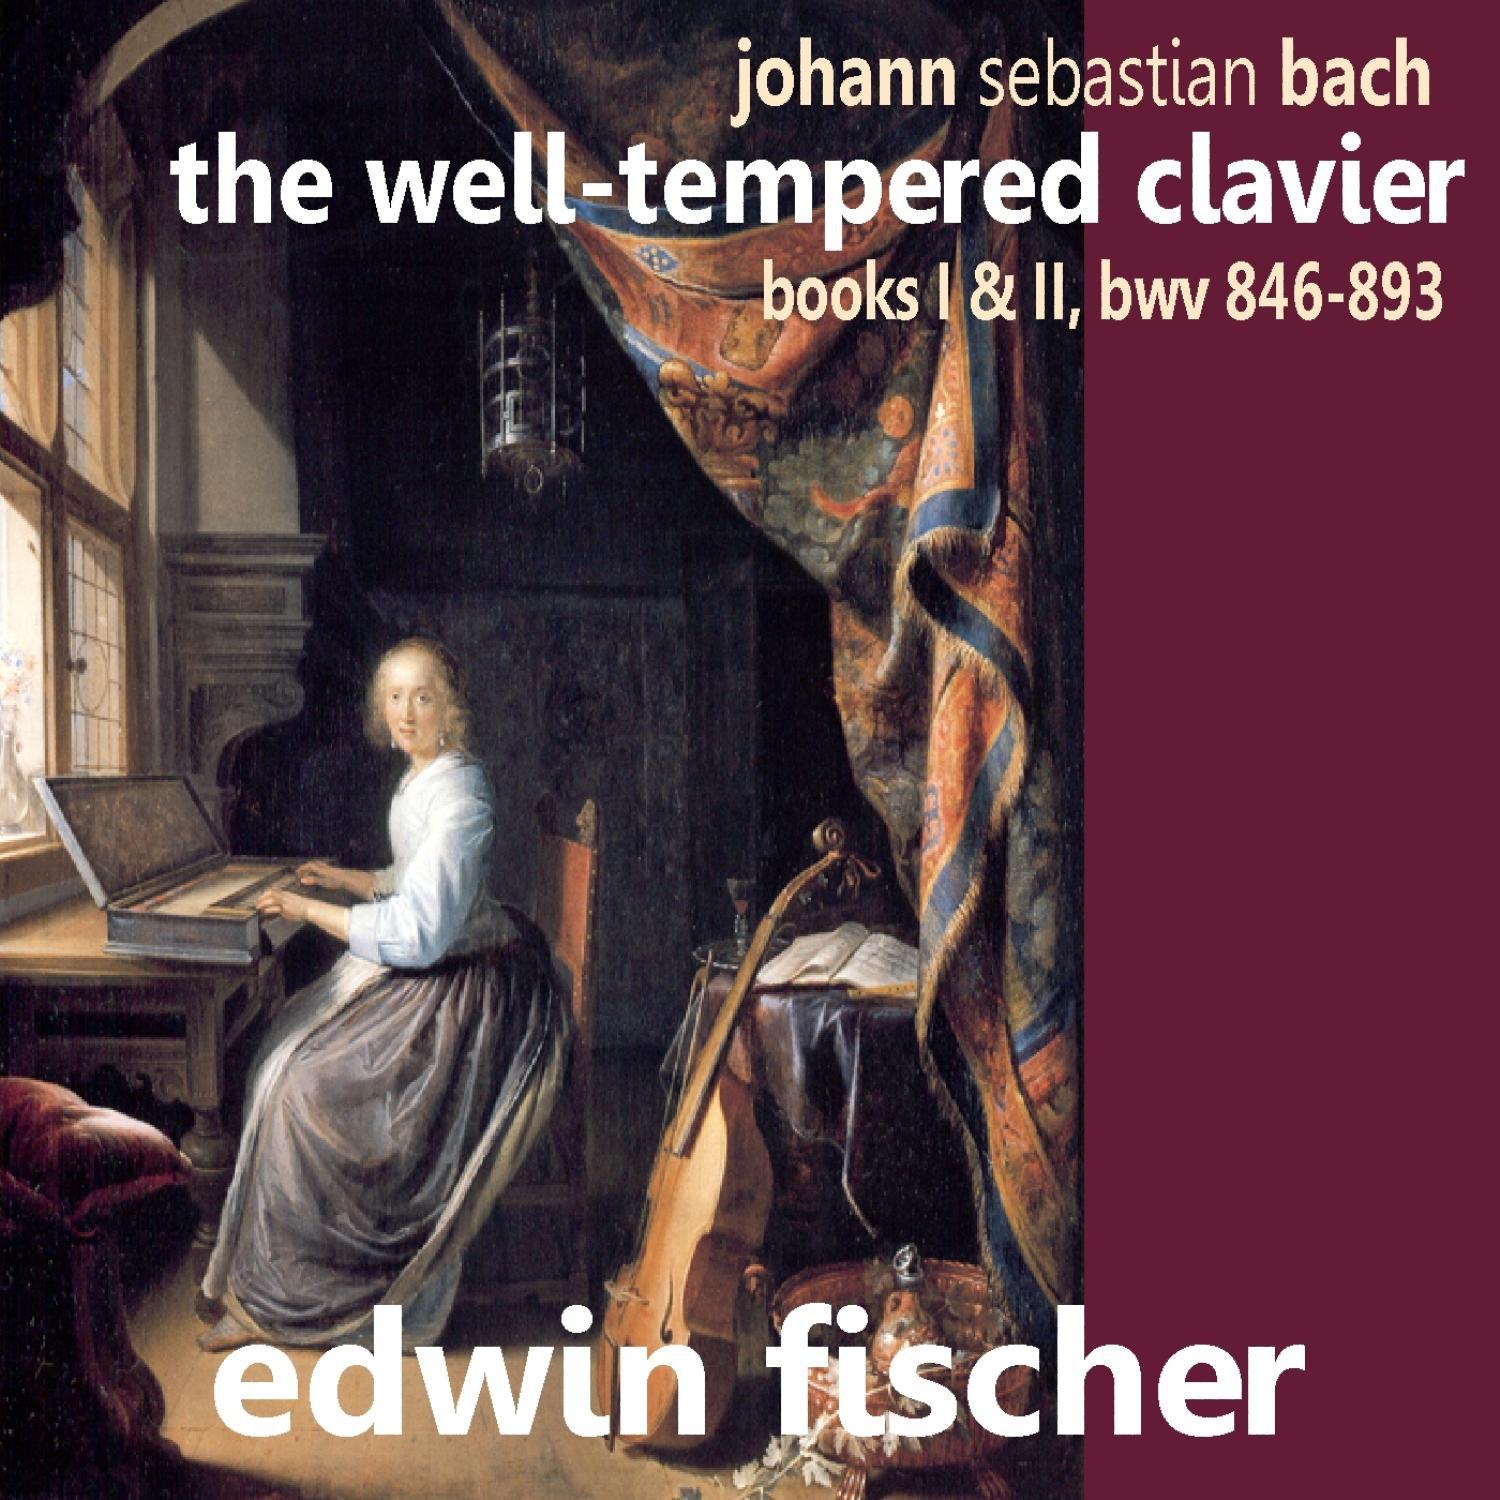 Book I, Prelude and Fugue No. 21 in B Flat Major, BWV 866